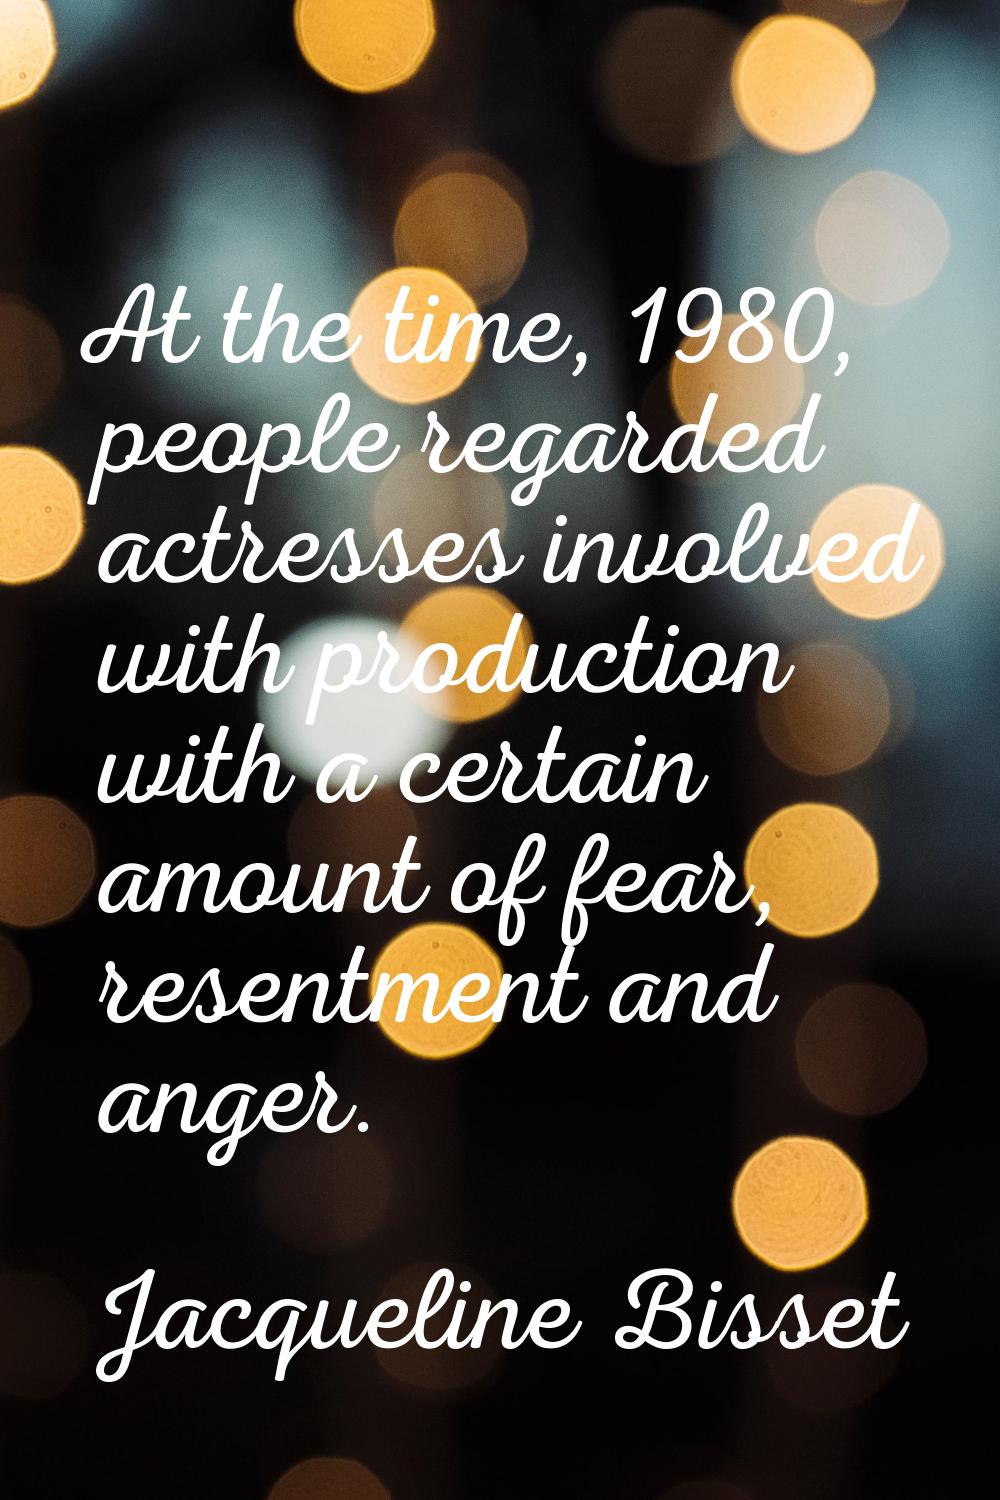 At the time, 1980, people regarded actresses involved with production with a certain amount of fear